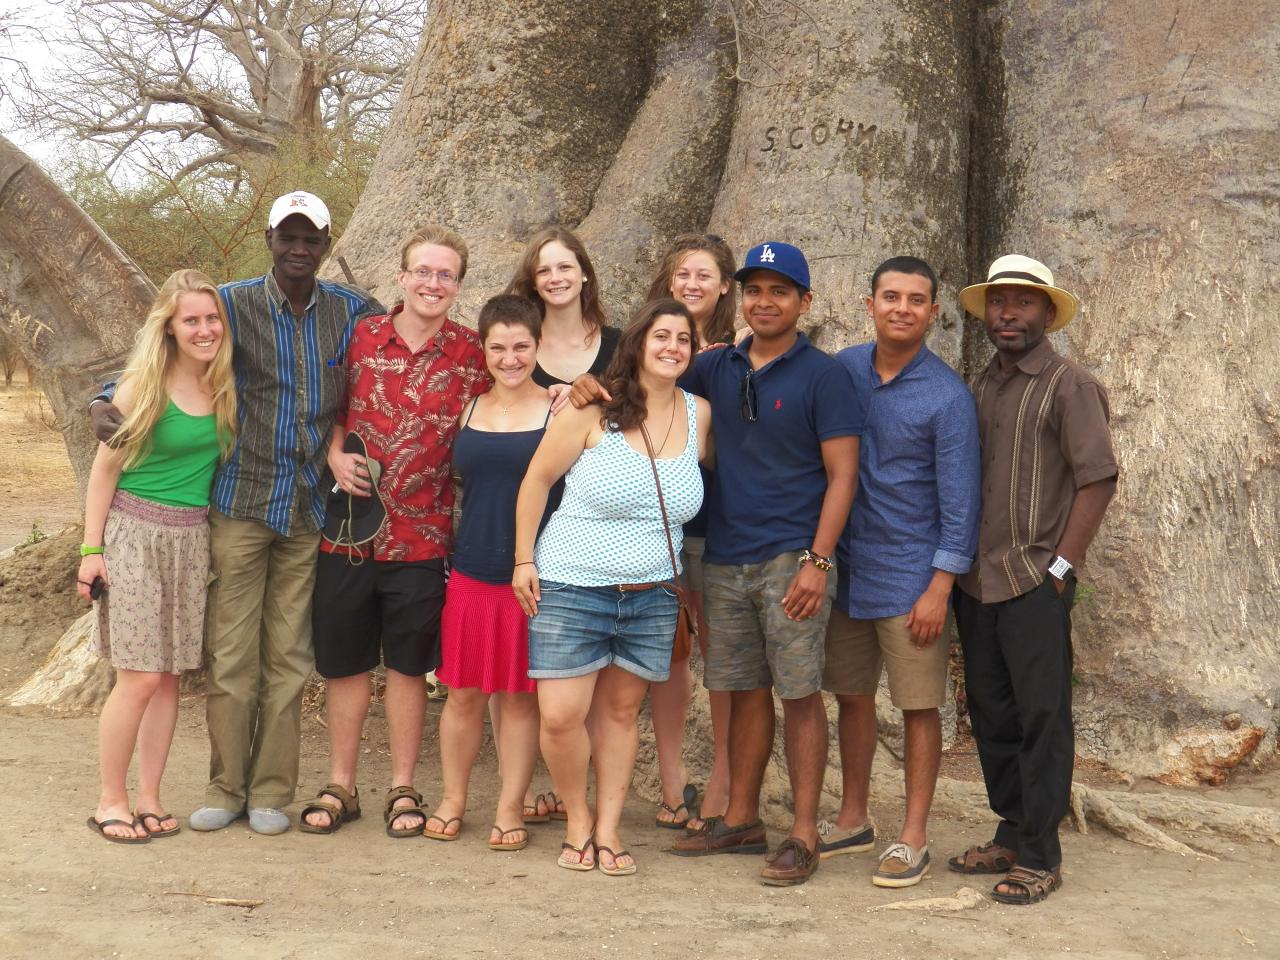 Dr Adabra With SUNY Geneseo students by a baobab tree